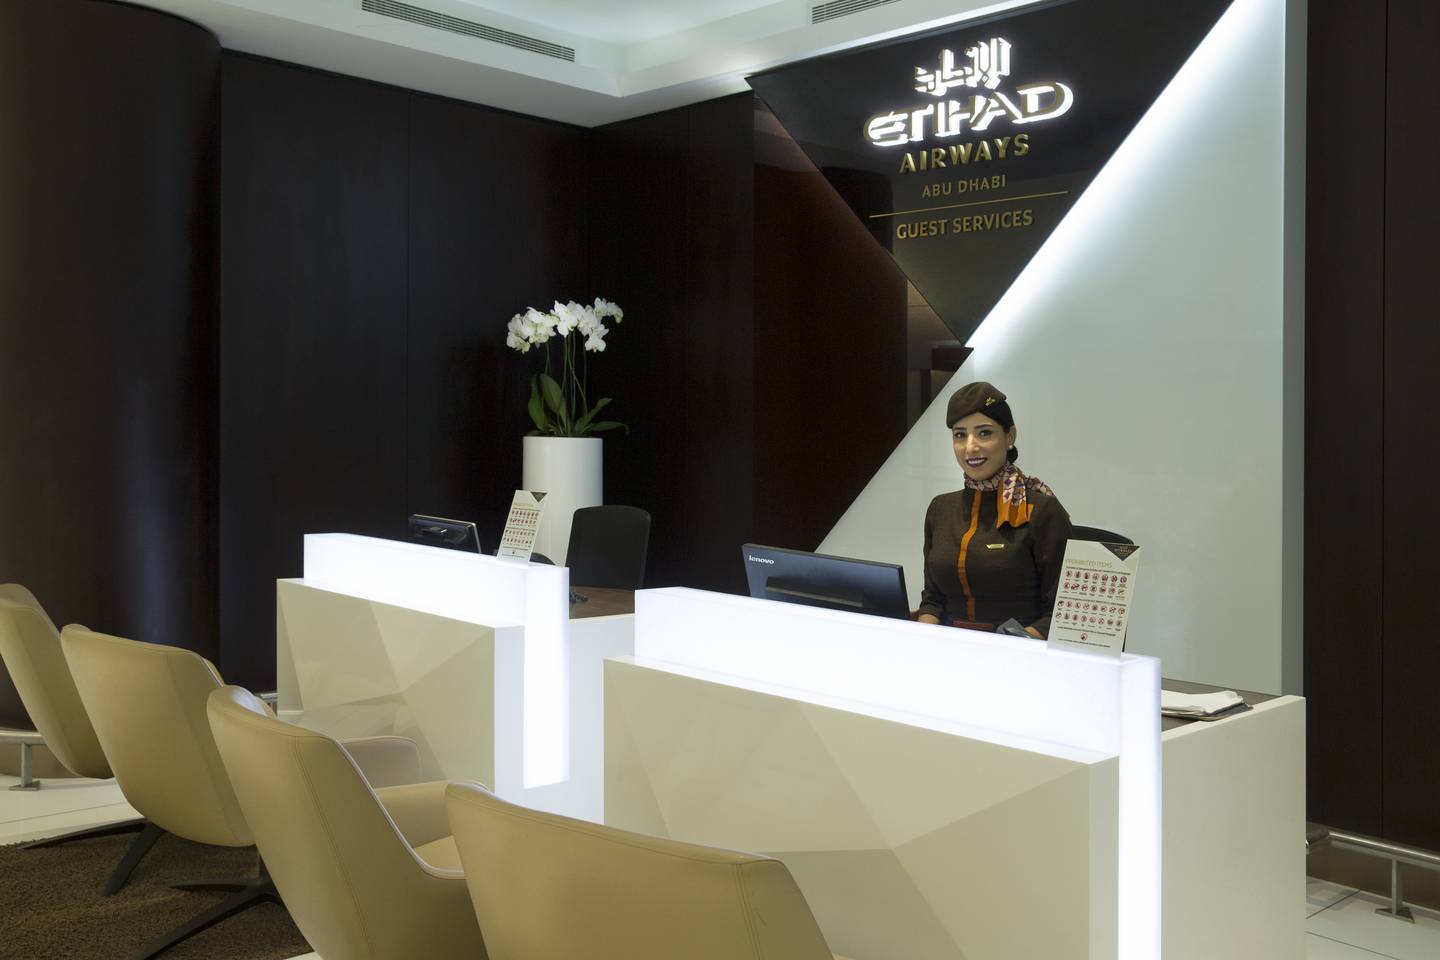 Travellers checking in early with Etihad Airways this winter can choose to receive extra baggage allowance or bonus loyalty miles. Photo: Etihad